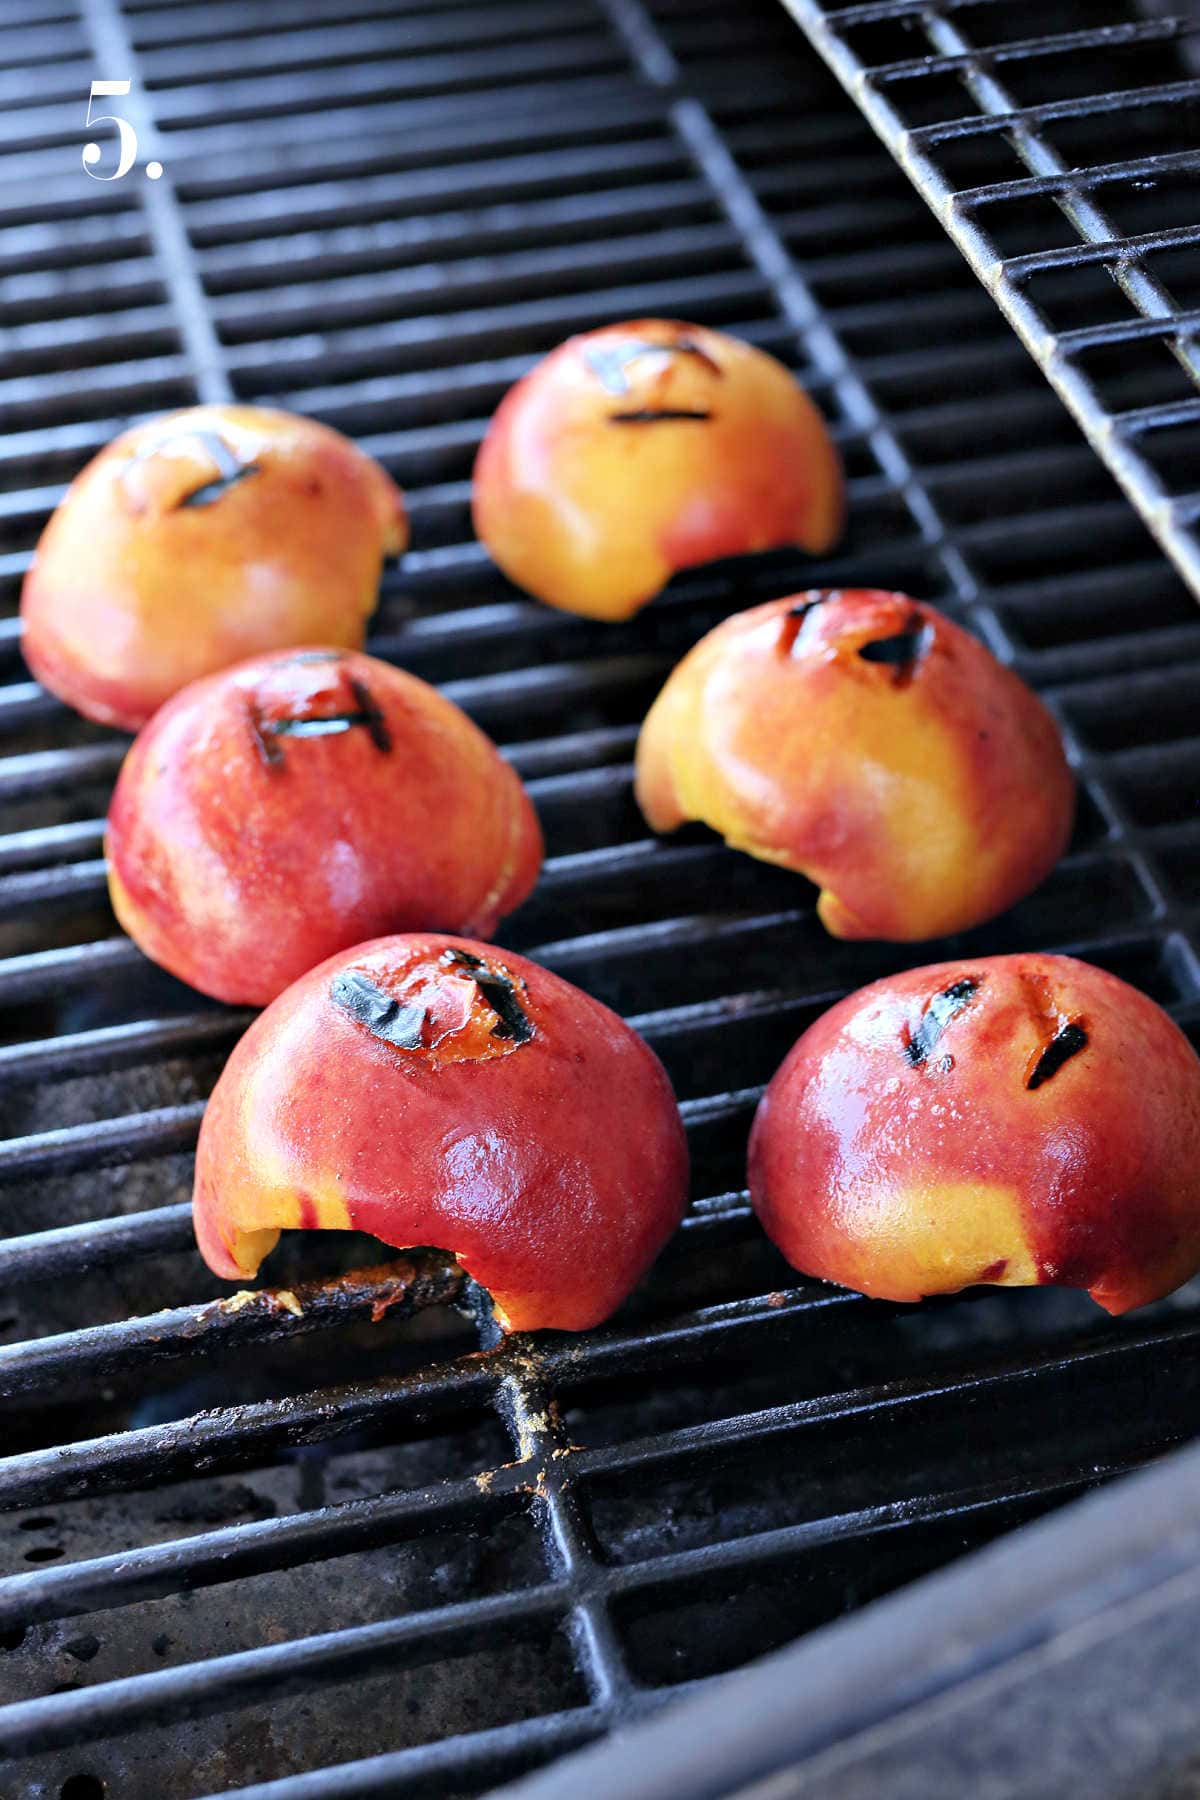 Peach fruit cut in half on the grill.